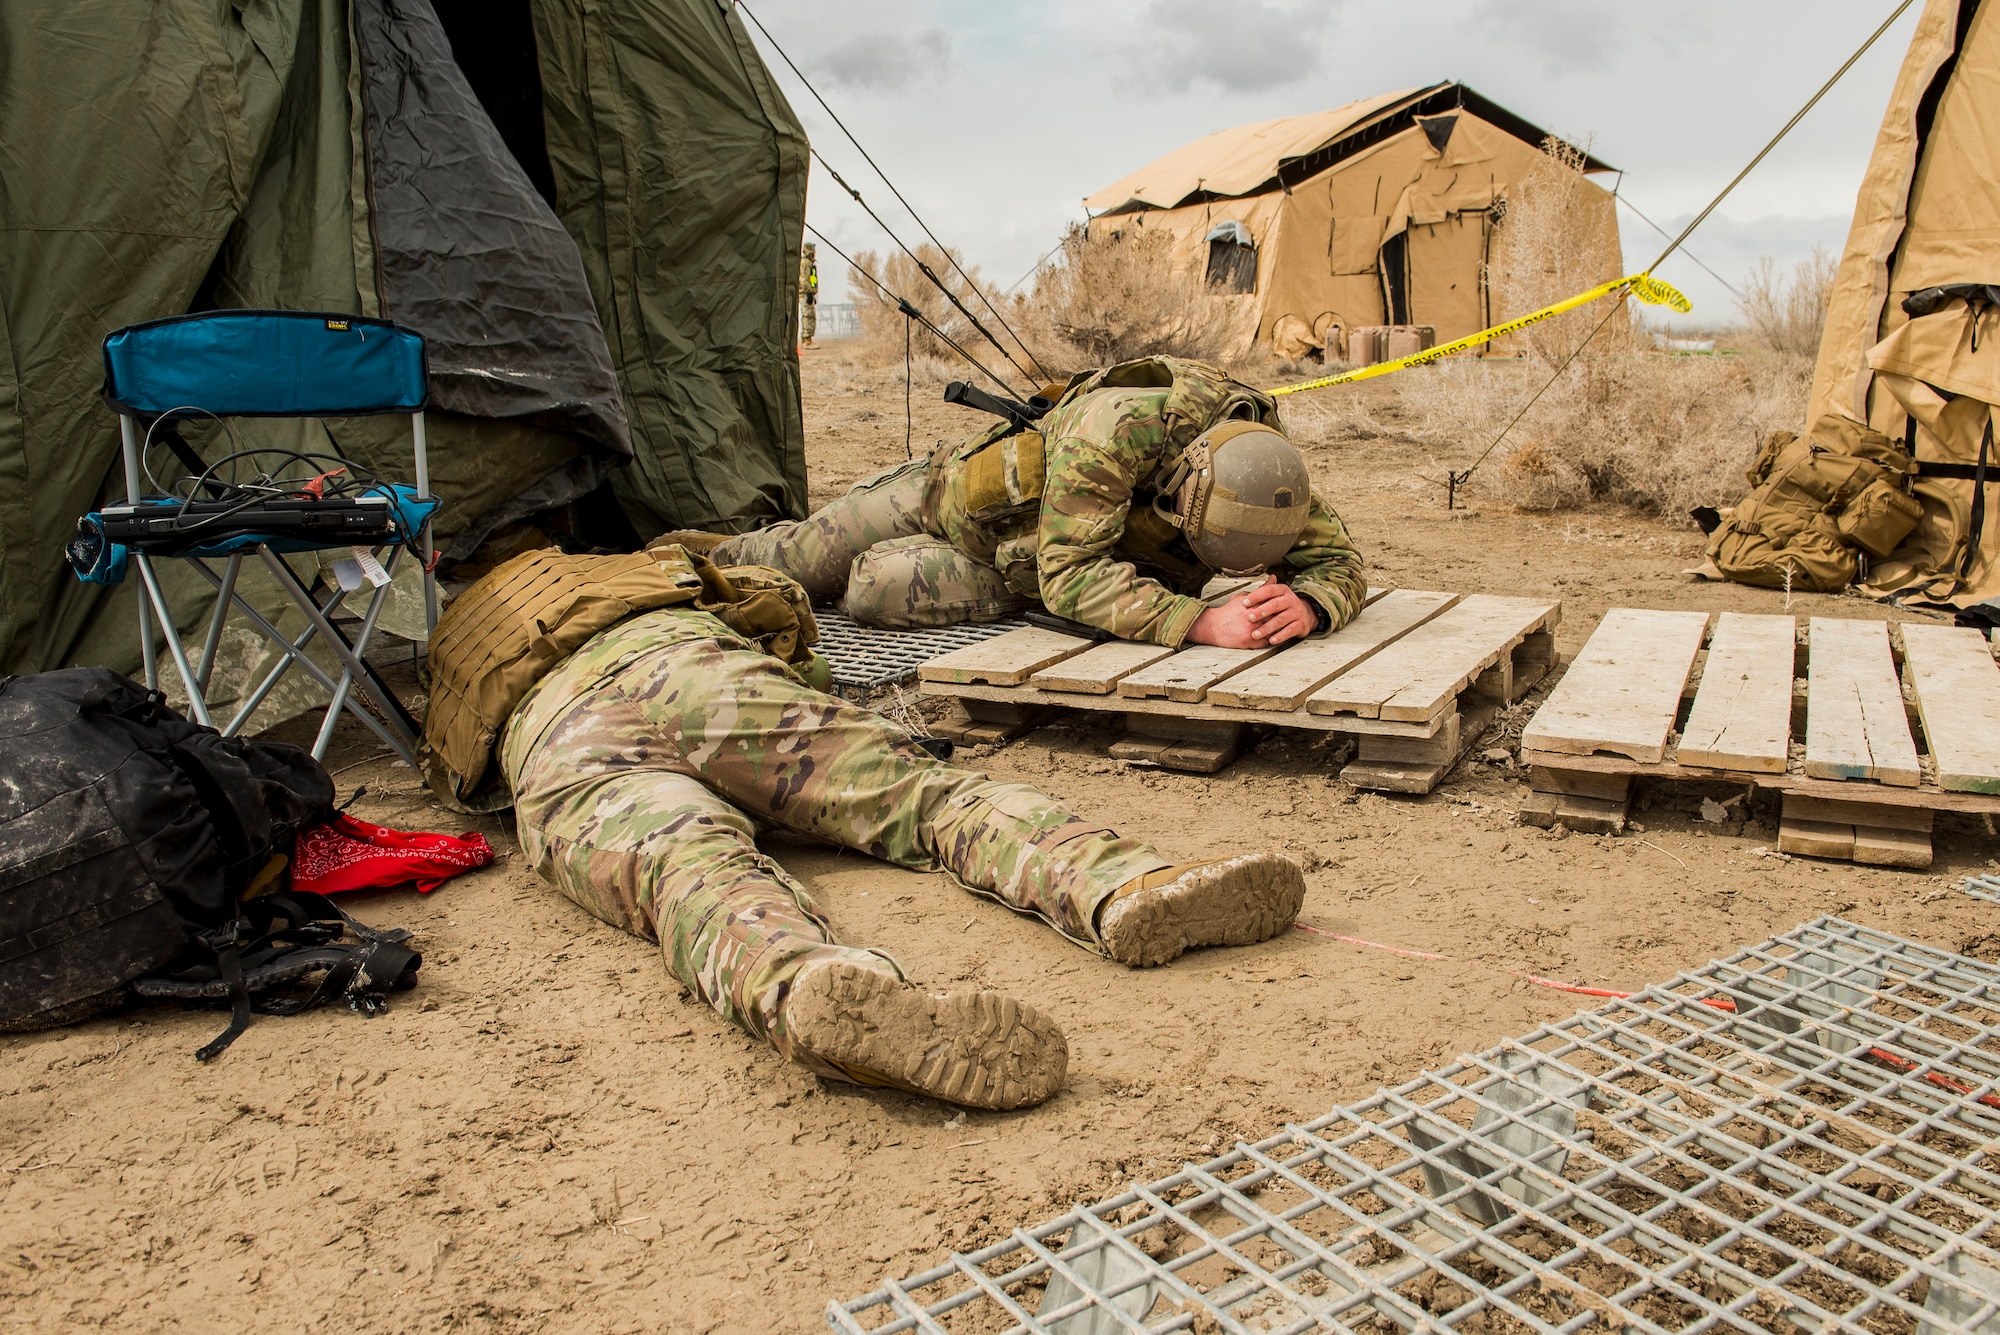 27th Special Operations Mission Support Team members take cover during a 27th Special Operations Wing operational readiness exercise at Dugway Proving Grounds, Utah, March 22, 2021. The Mission Support Team concept provides a way forward in building small, scattered teams capable of operating independent of main operating bases. (U.S. Air Force photo by Senior Airman Vernon R. Walter III)